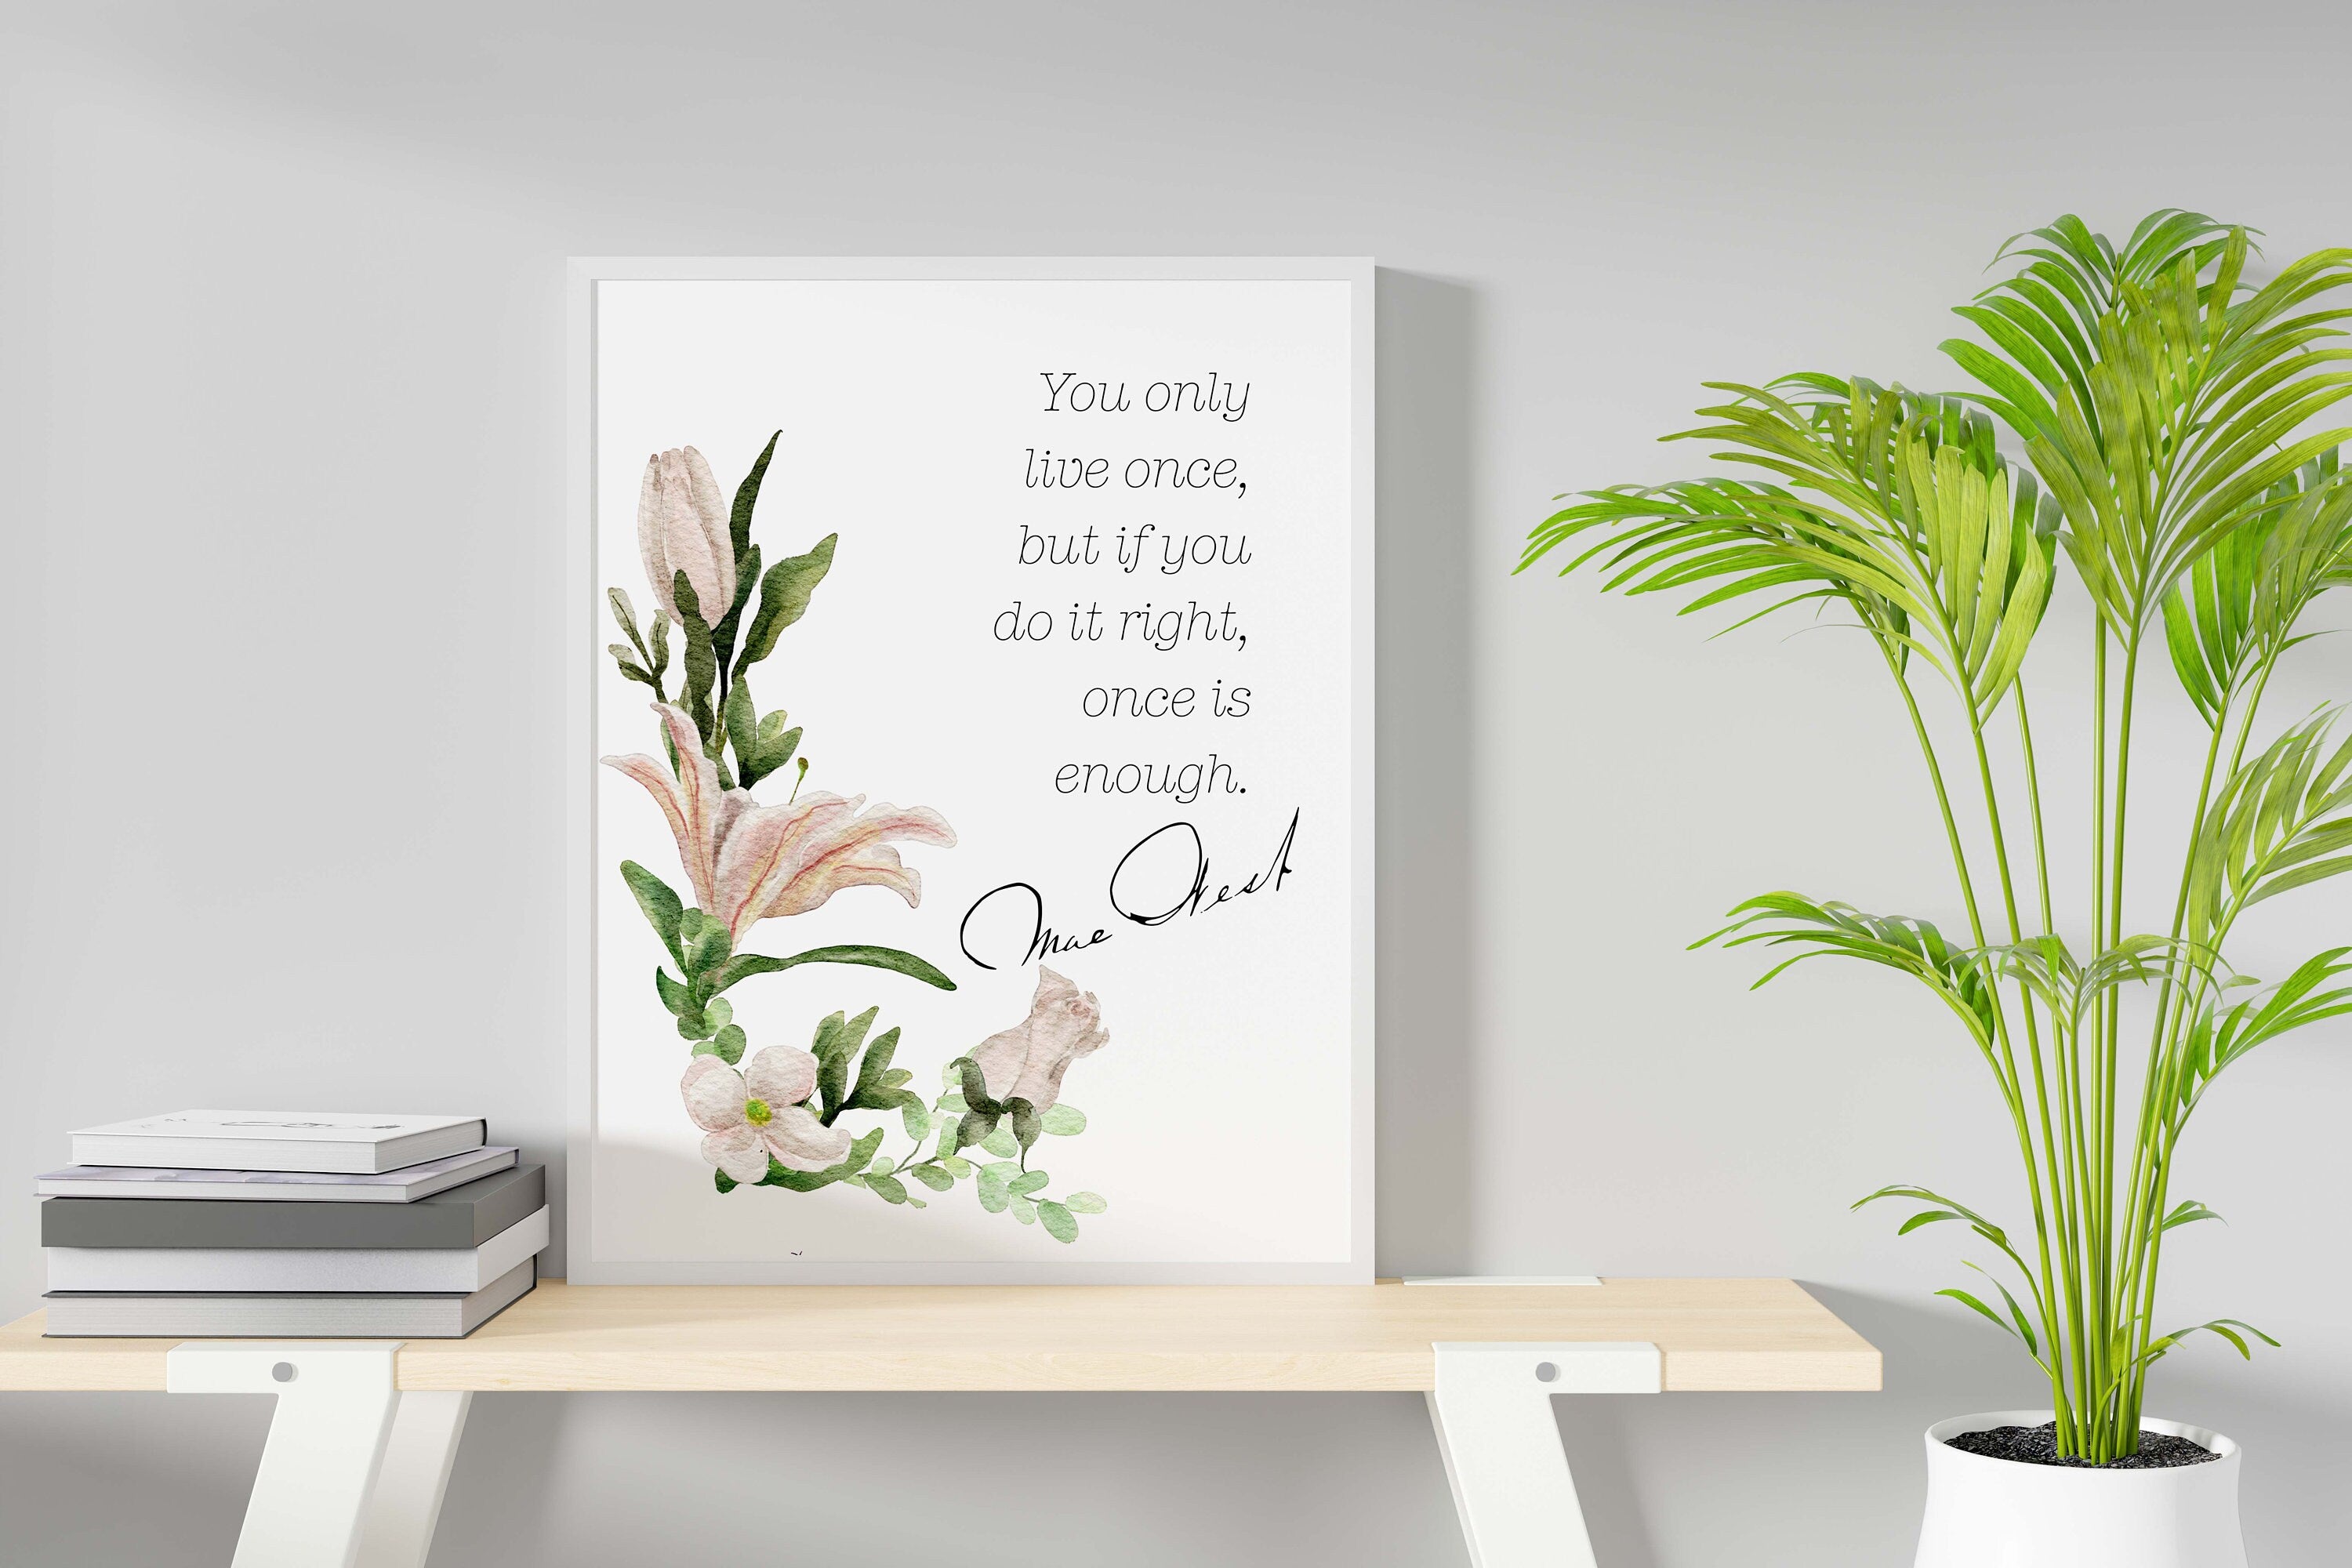 Mae West Quote Art Print - "You only live once, but if you do it right, once is enough", Floral Botanical Print Available Framed or Unframed